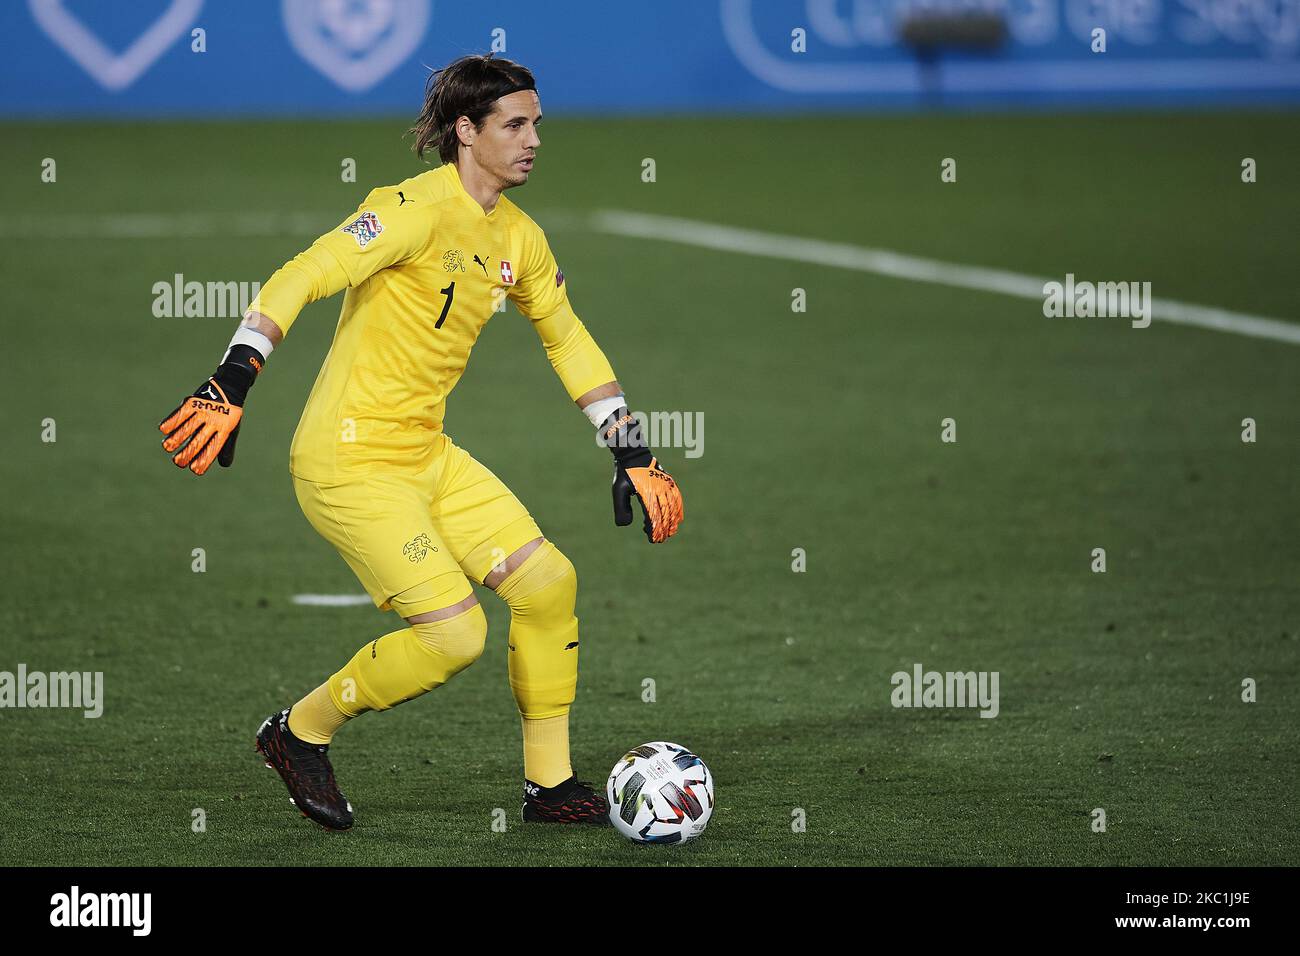 Yann Sommer (Borussia Monchengladbach) of Switzerland in action during the UEFA Nations League group stage match between Spain and Switzerland at Estadio Alfredo Di Stefano on October 10, 2020 in Madrid, Spain. (Photo by Jose Breton/Pics Action/NurPhoto) Stock Photo